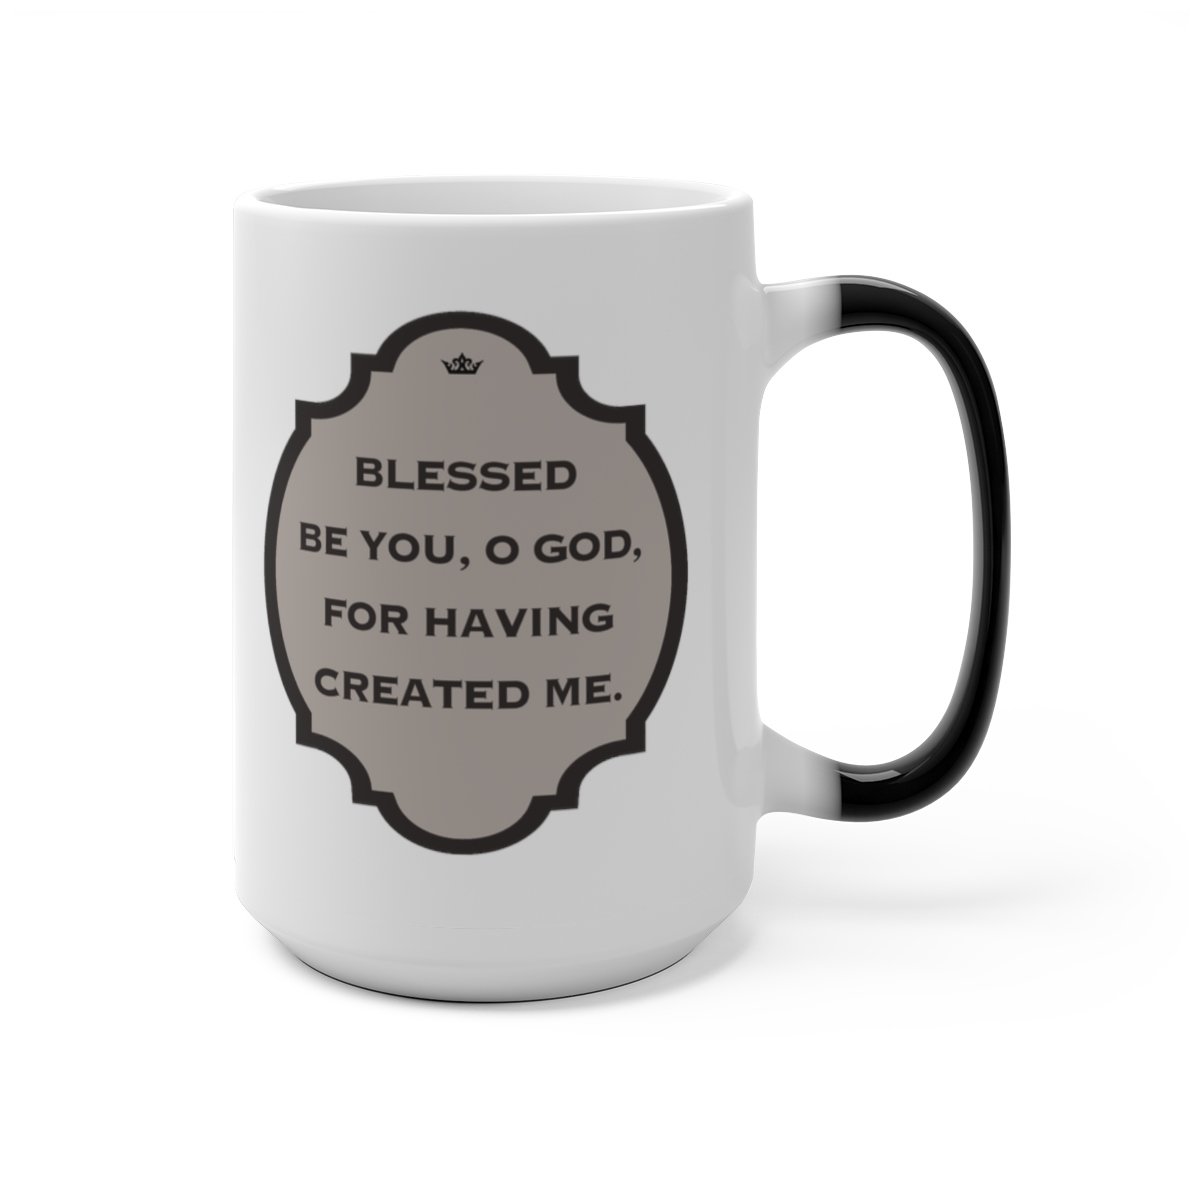 St. Clare of Assisi Transitional Mug